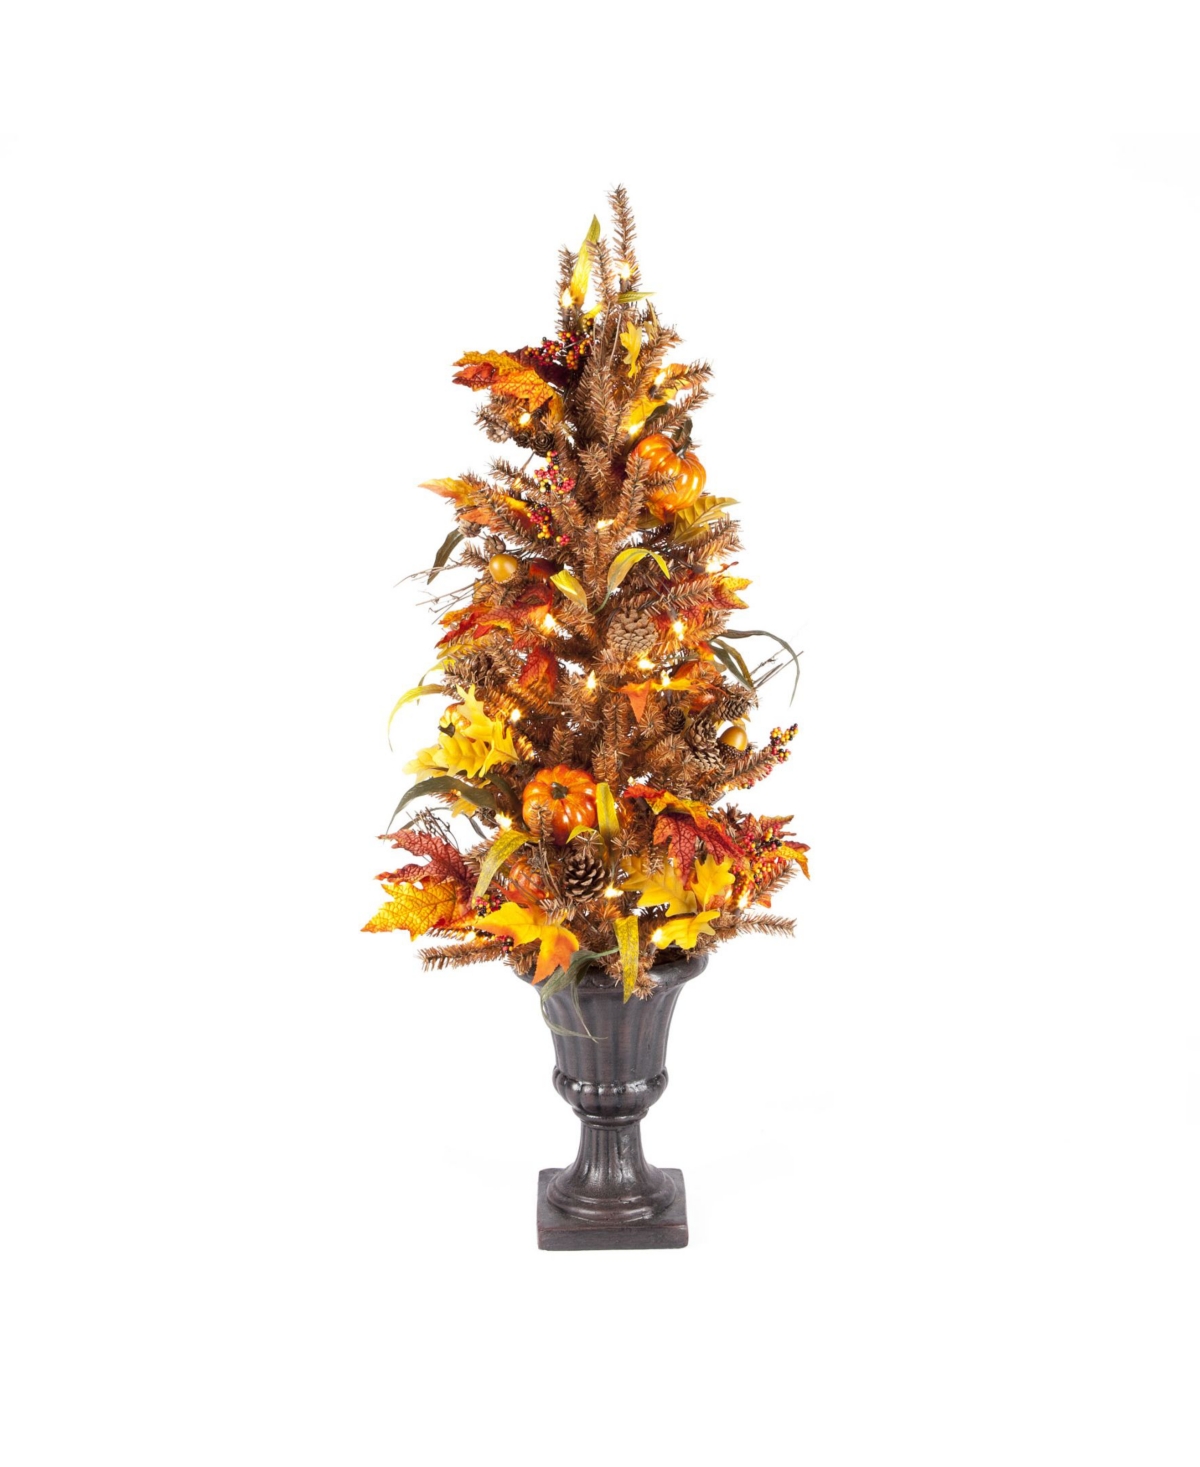 Gerson International 46 Pre-Lit Fall or Harvest Tree with Pumpkins, Pinecones, and Berries with 50 Lights